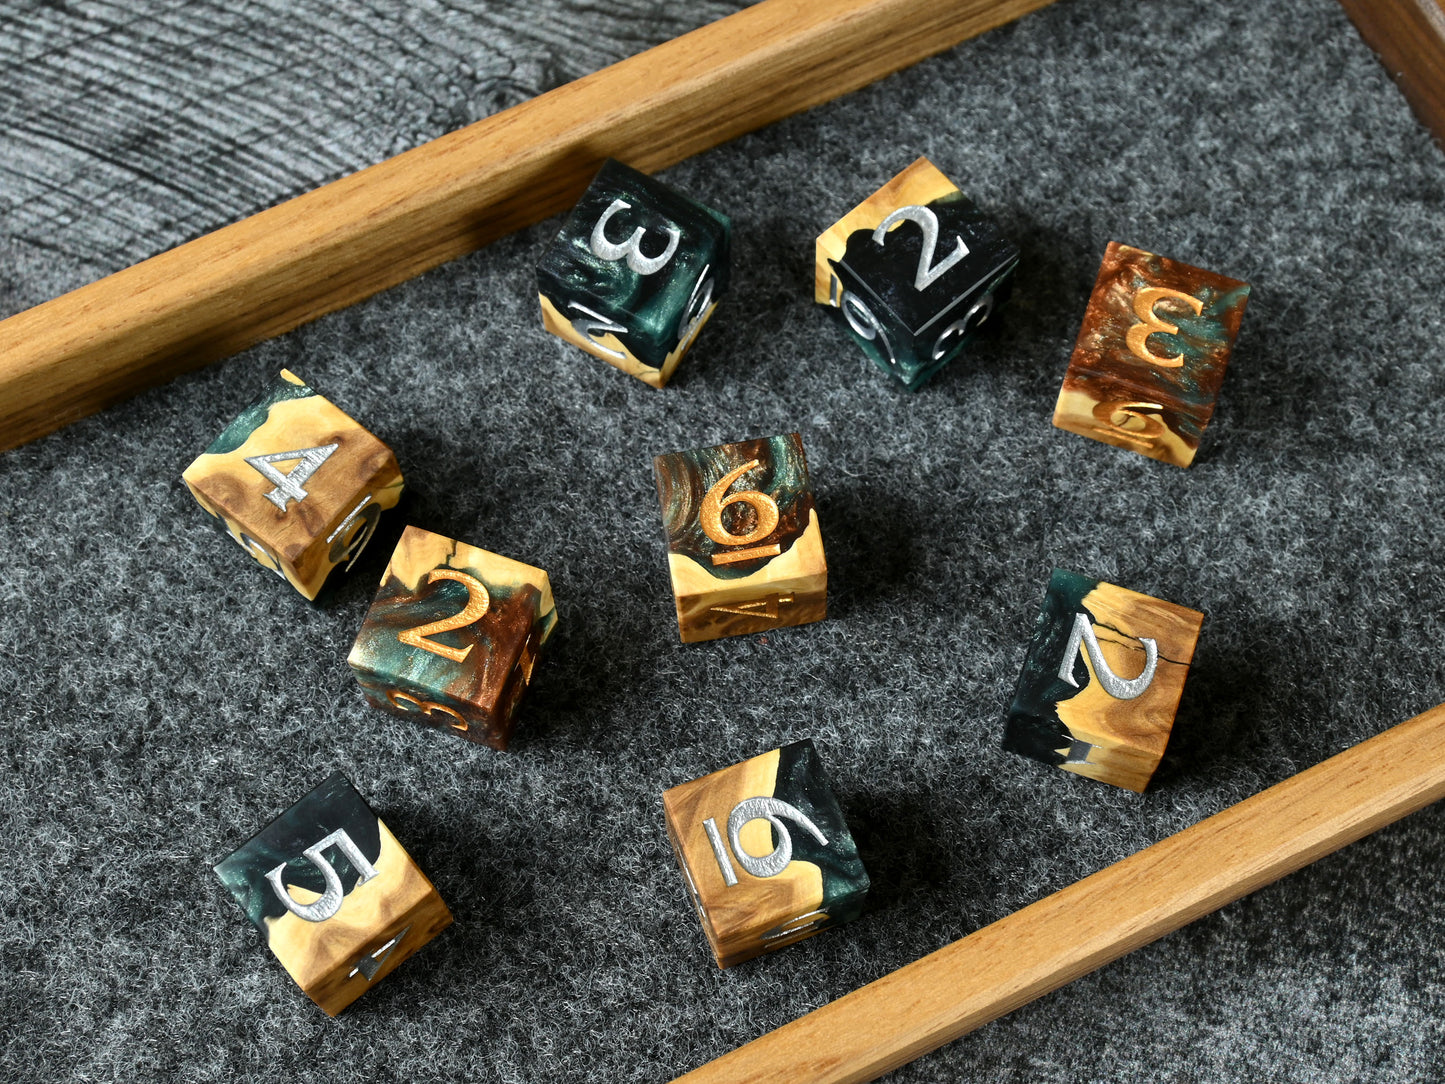 9d6 dice set made from brown mallee burl wood and resin for D&D ttrpg